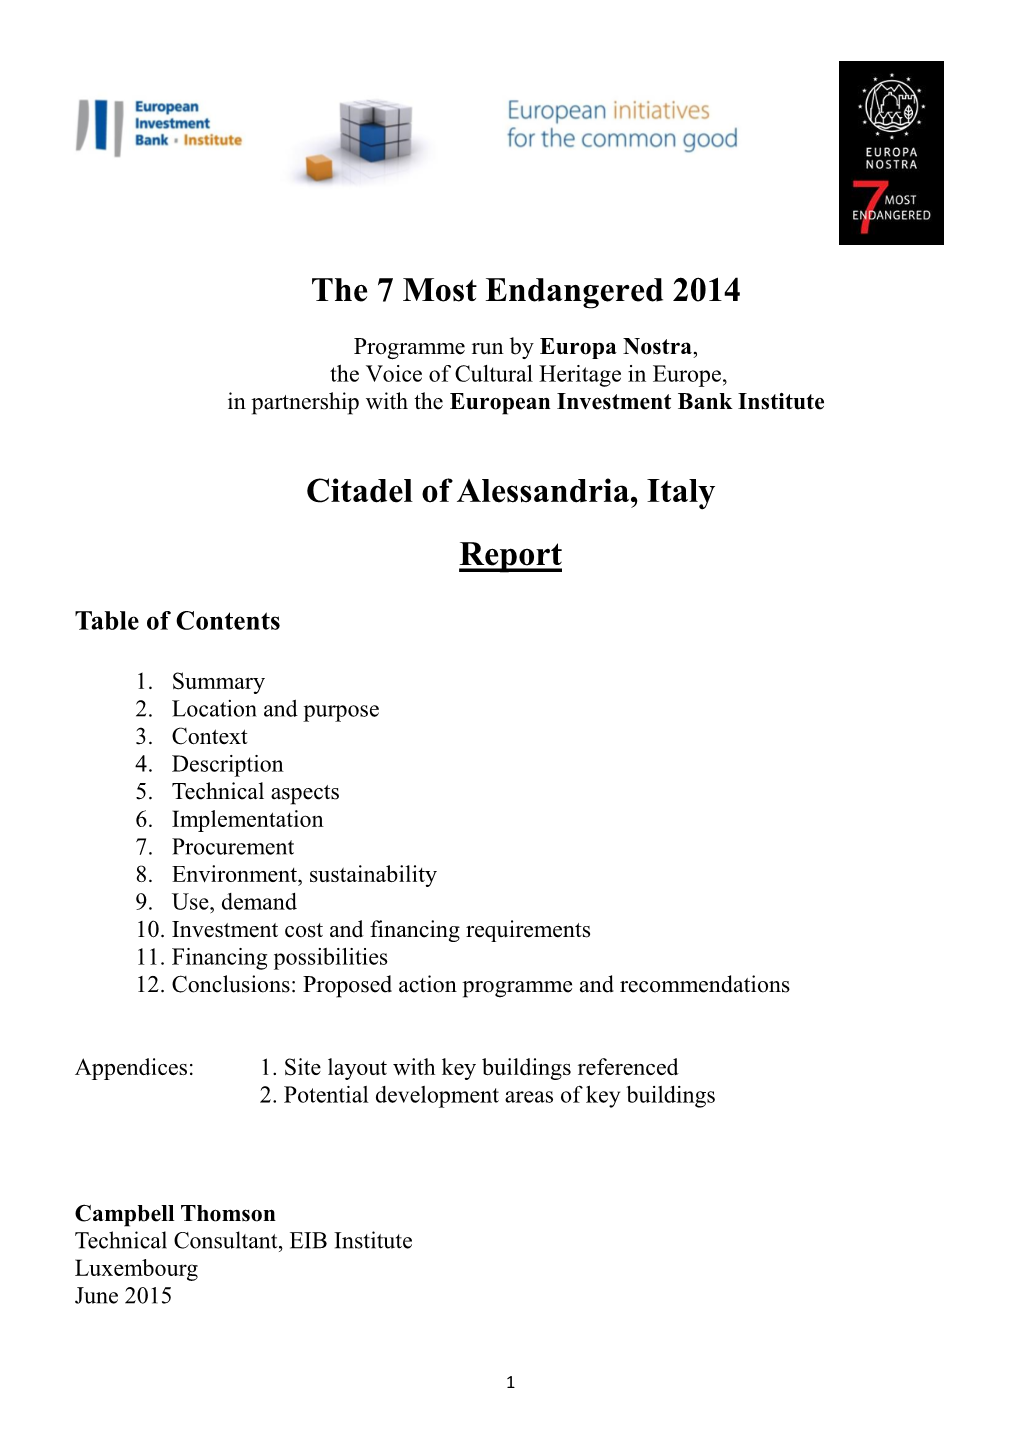 The 7 Most Endangered 2014 Citadel of Alessandria, Italy Report